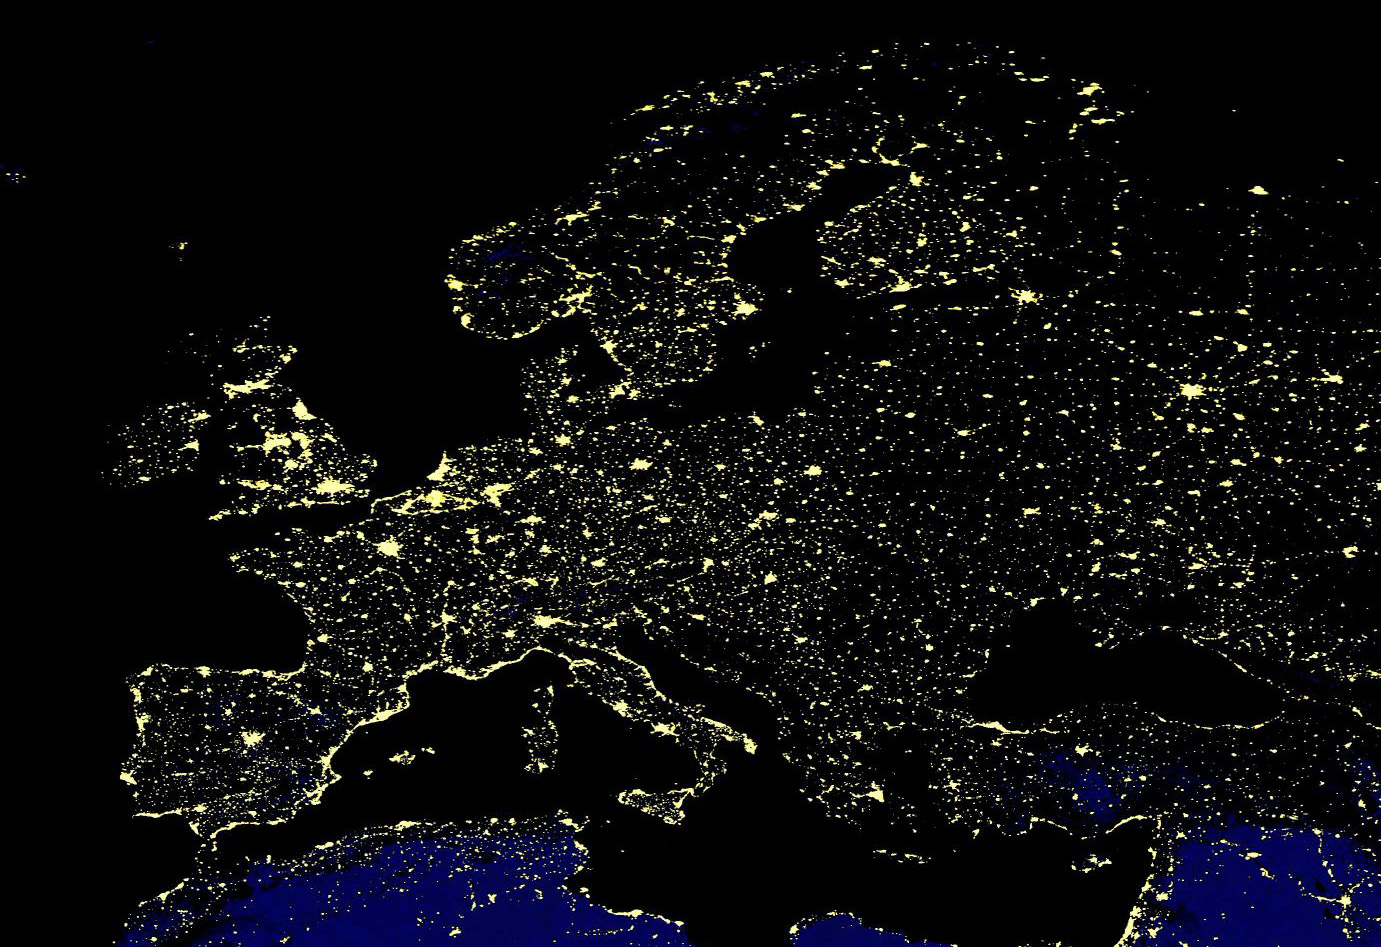 Europe at night viewed from space